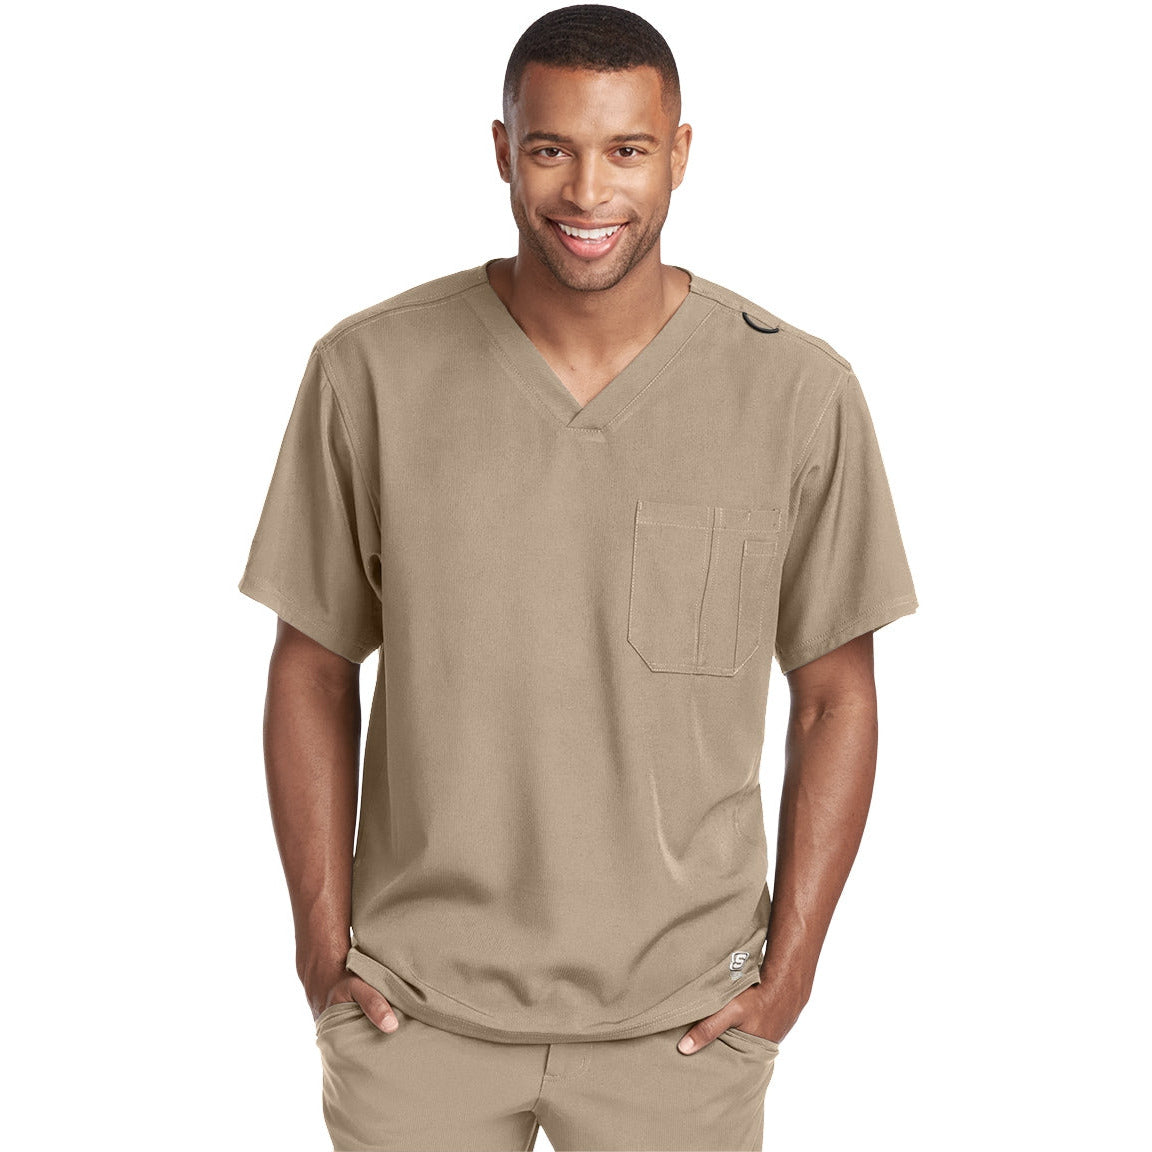 Skechers Structure Crossover Scrub Top